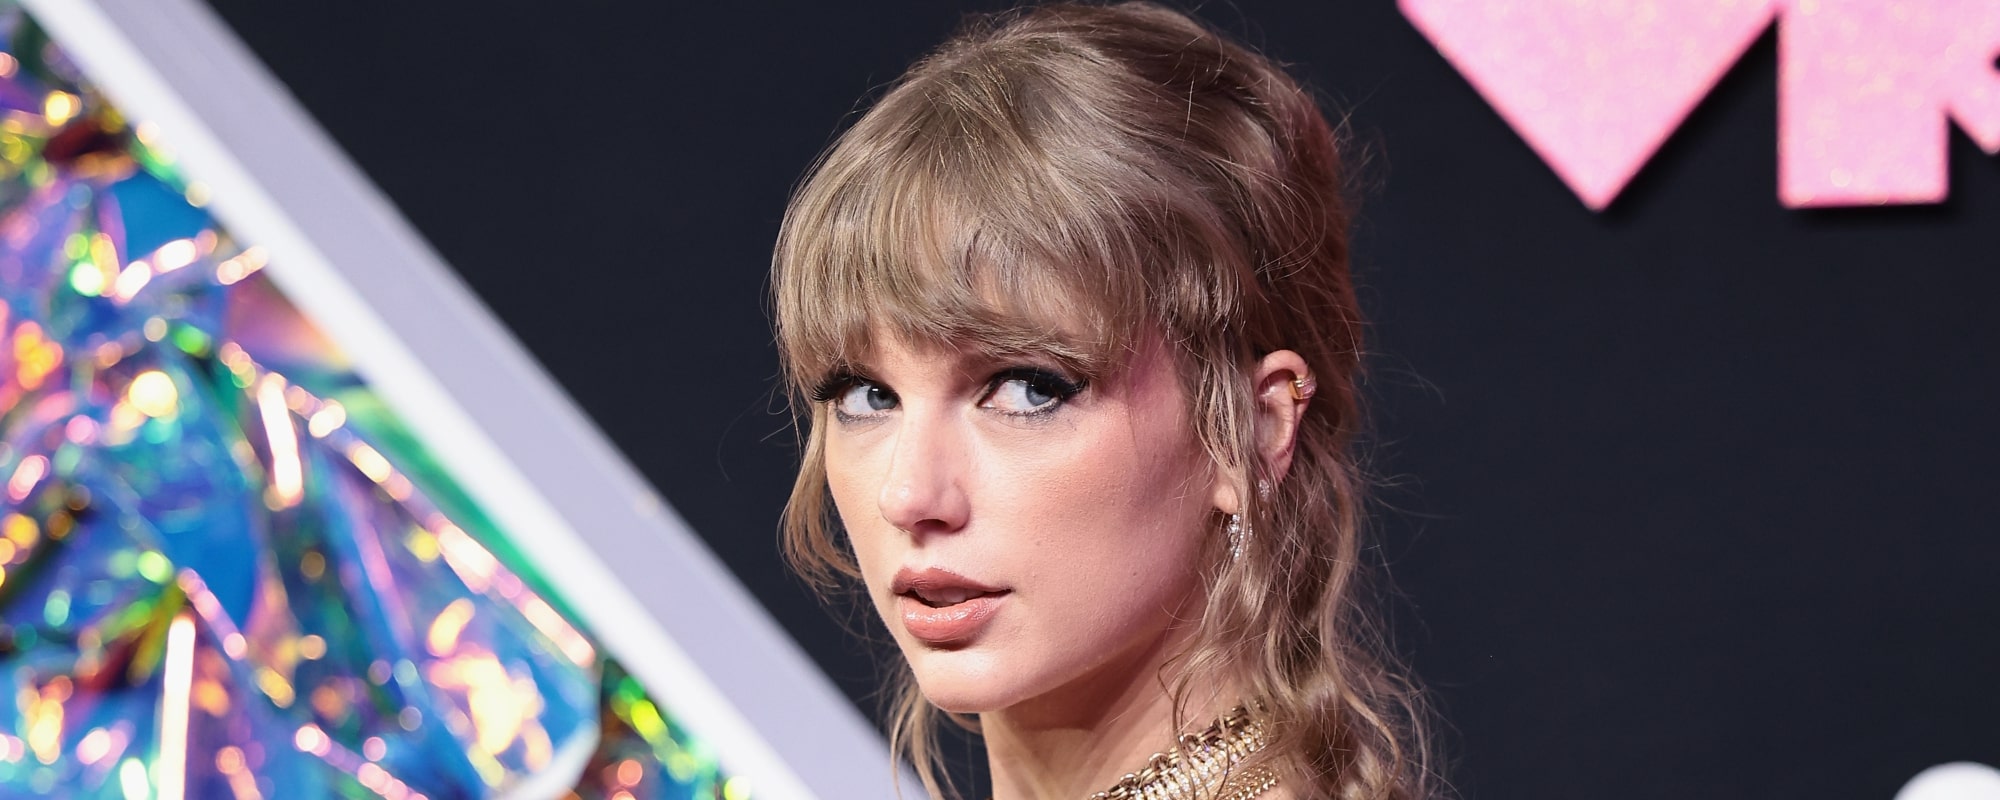 Federal Reserve credits Taylor Swift with boosting hotel revenues